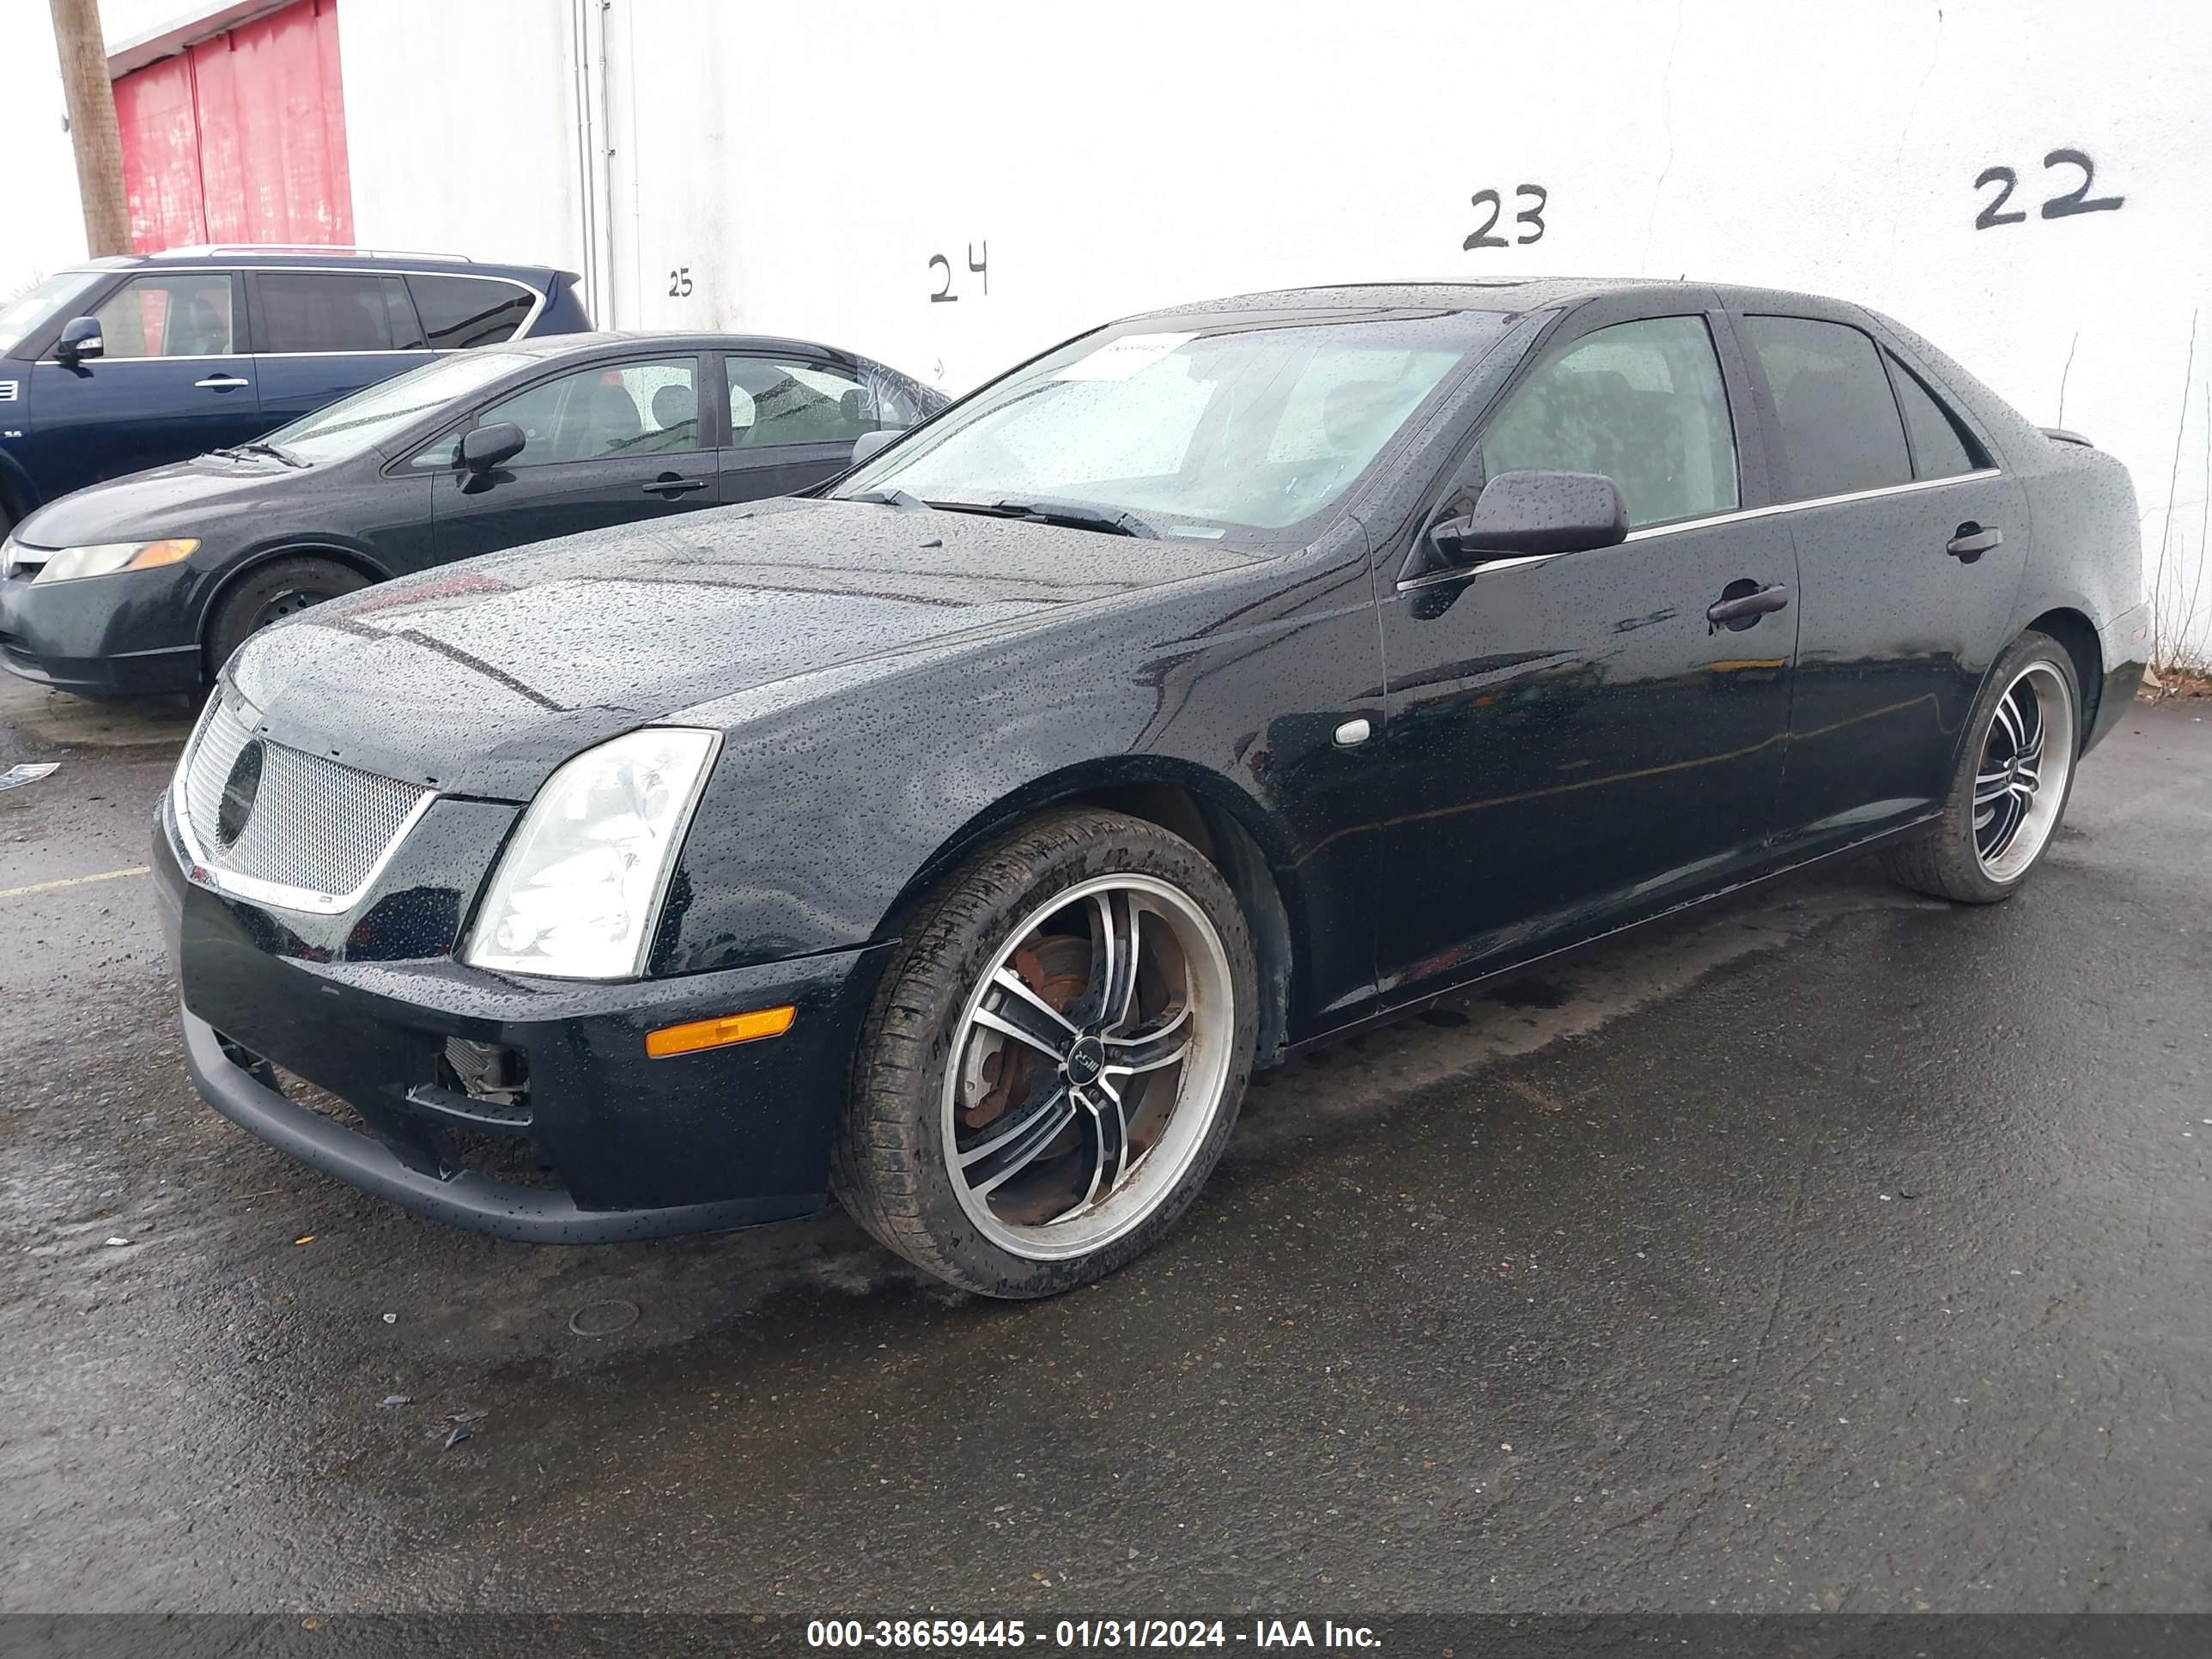 1G6DC67A860104418  - CADILLAC STS  2006 IMG - 1